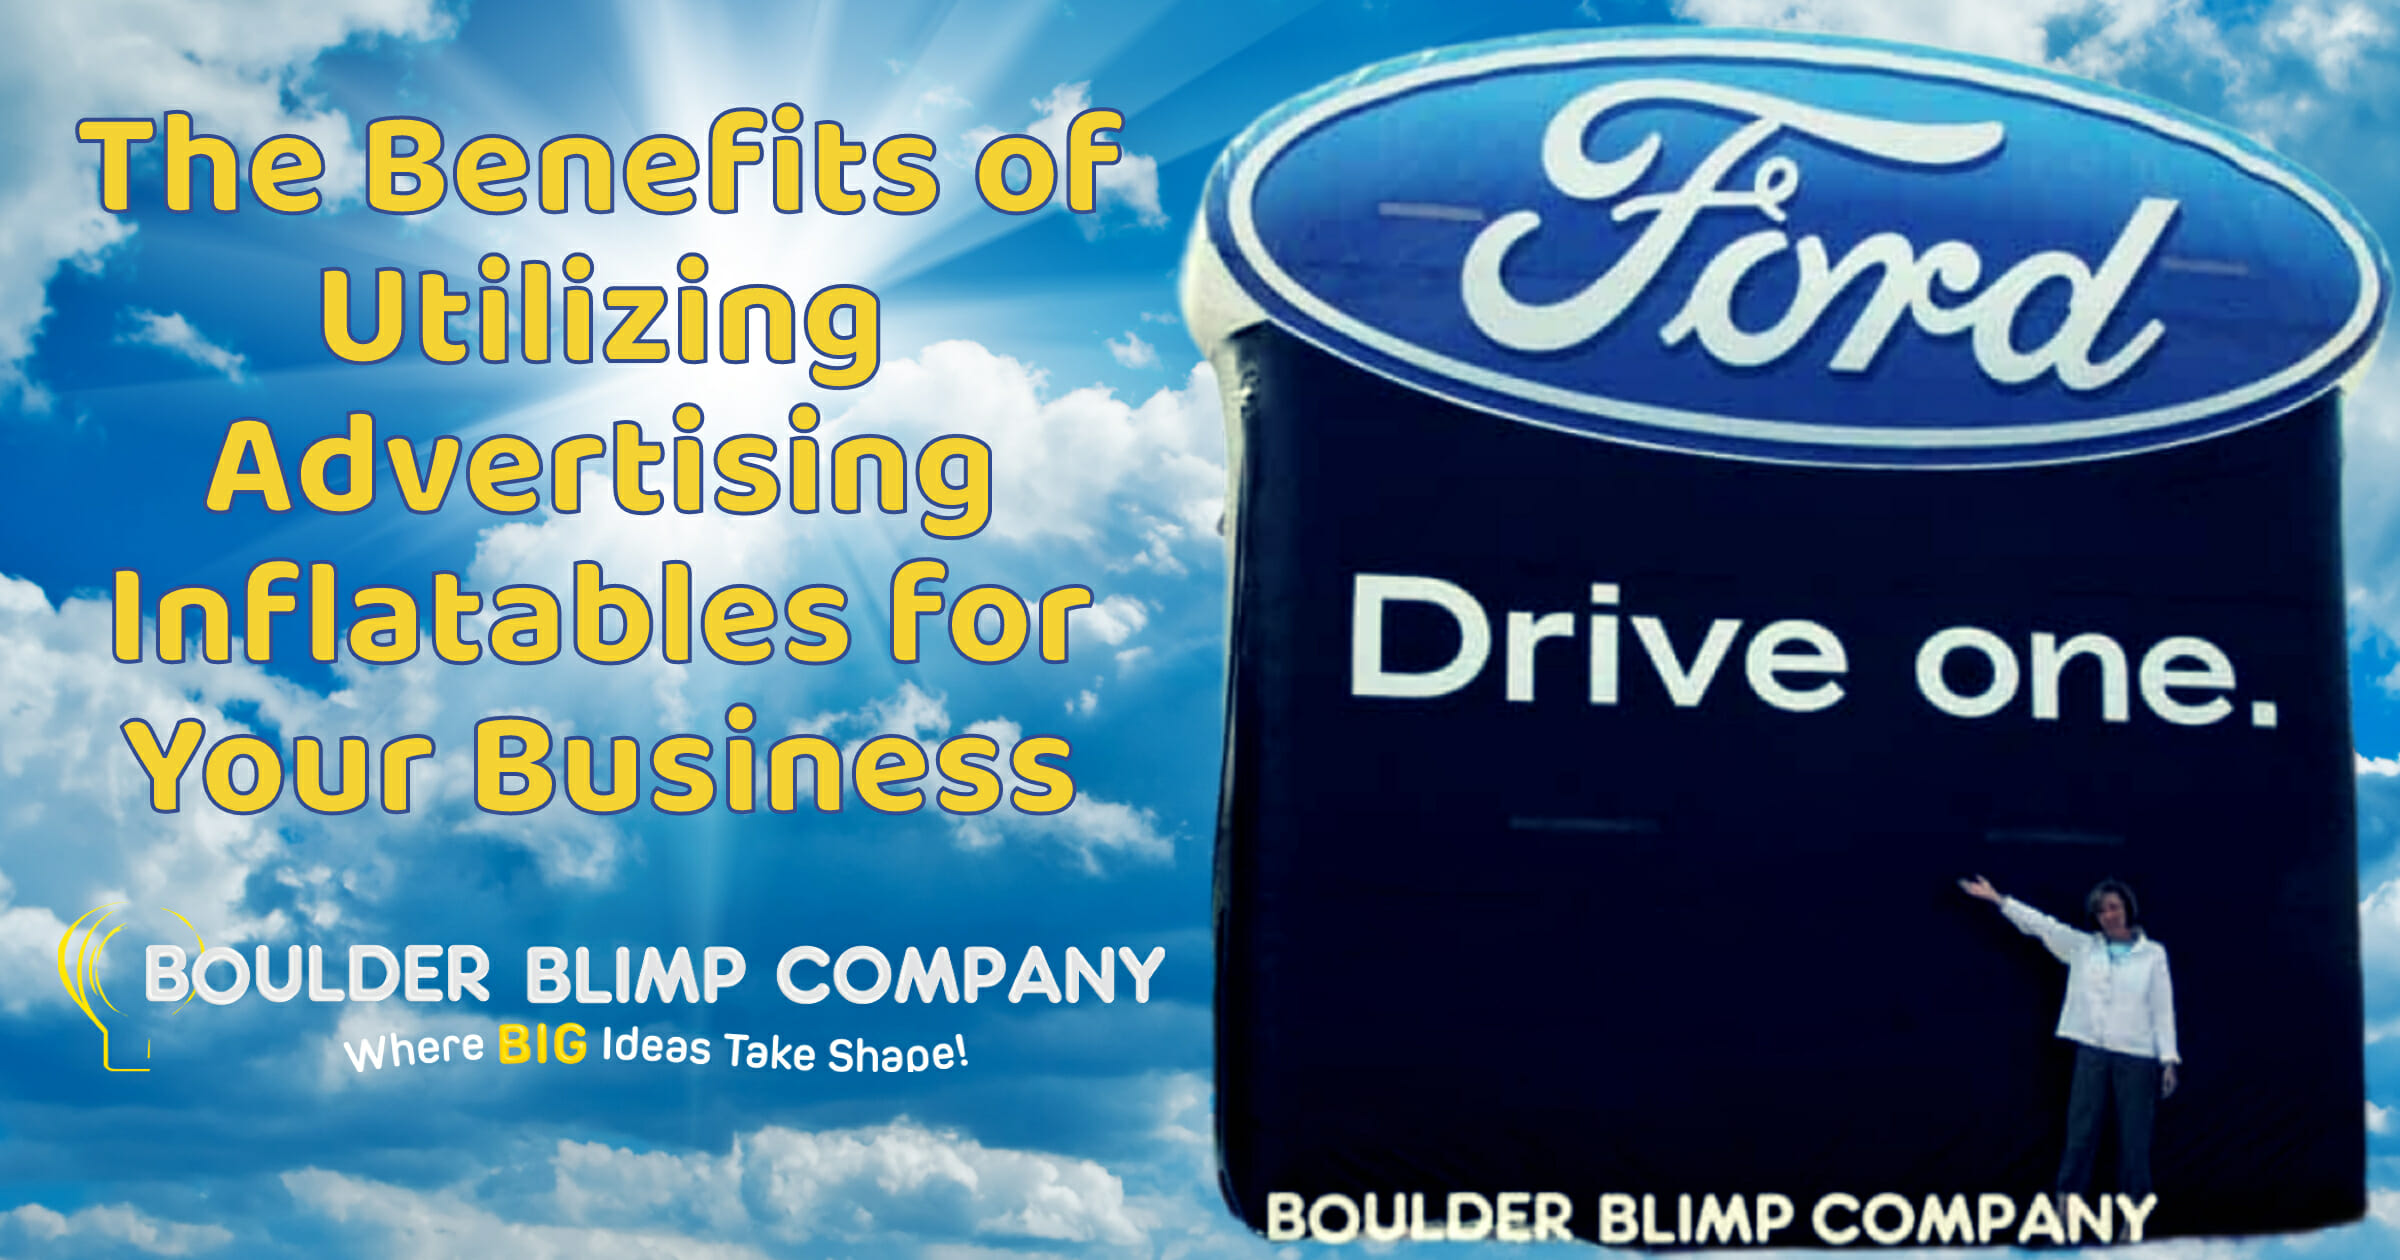 The Benefits of Utilizing Advertising Inflatables for Your Business